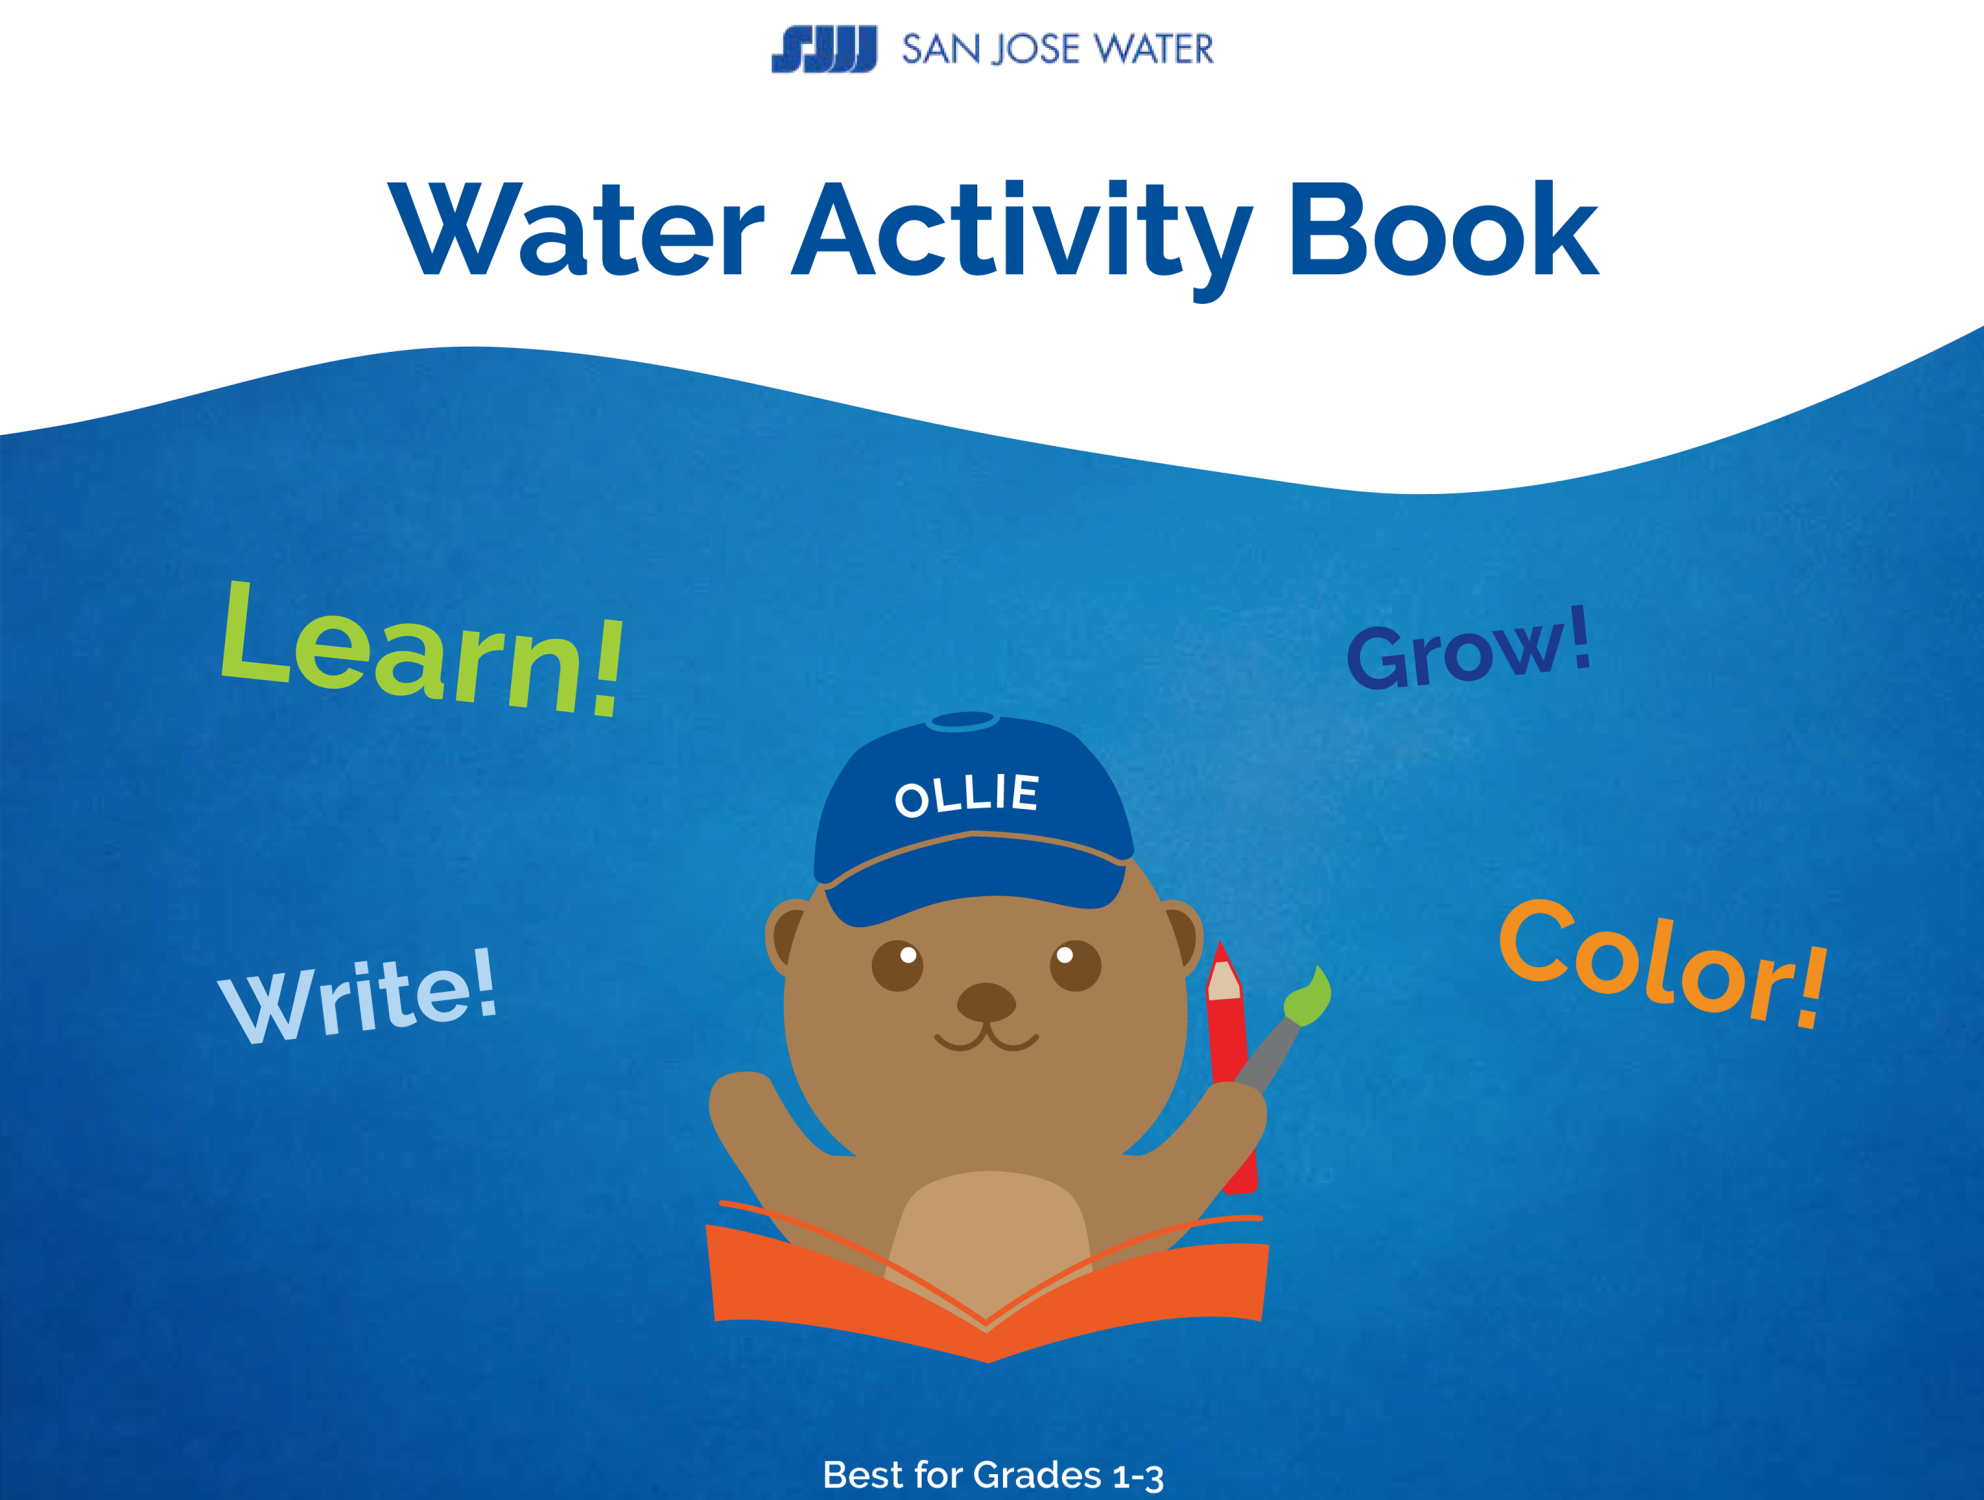 SJW Kids Activity Book Grade 1-3 Cover of Ollie the Otter with a pen and booklet open